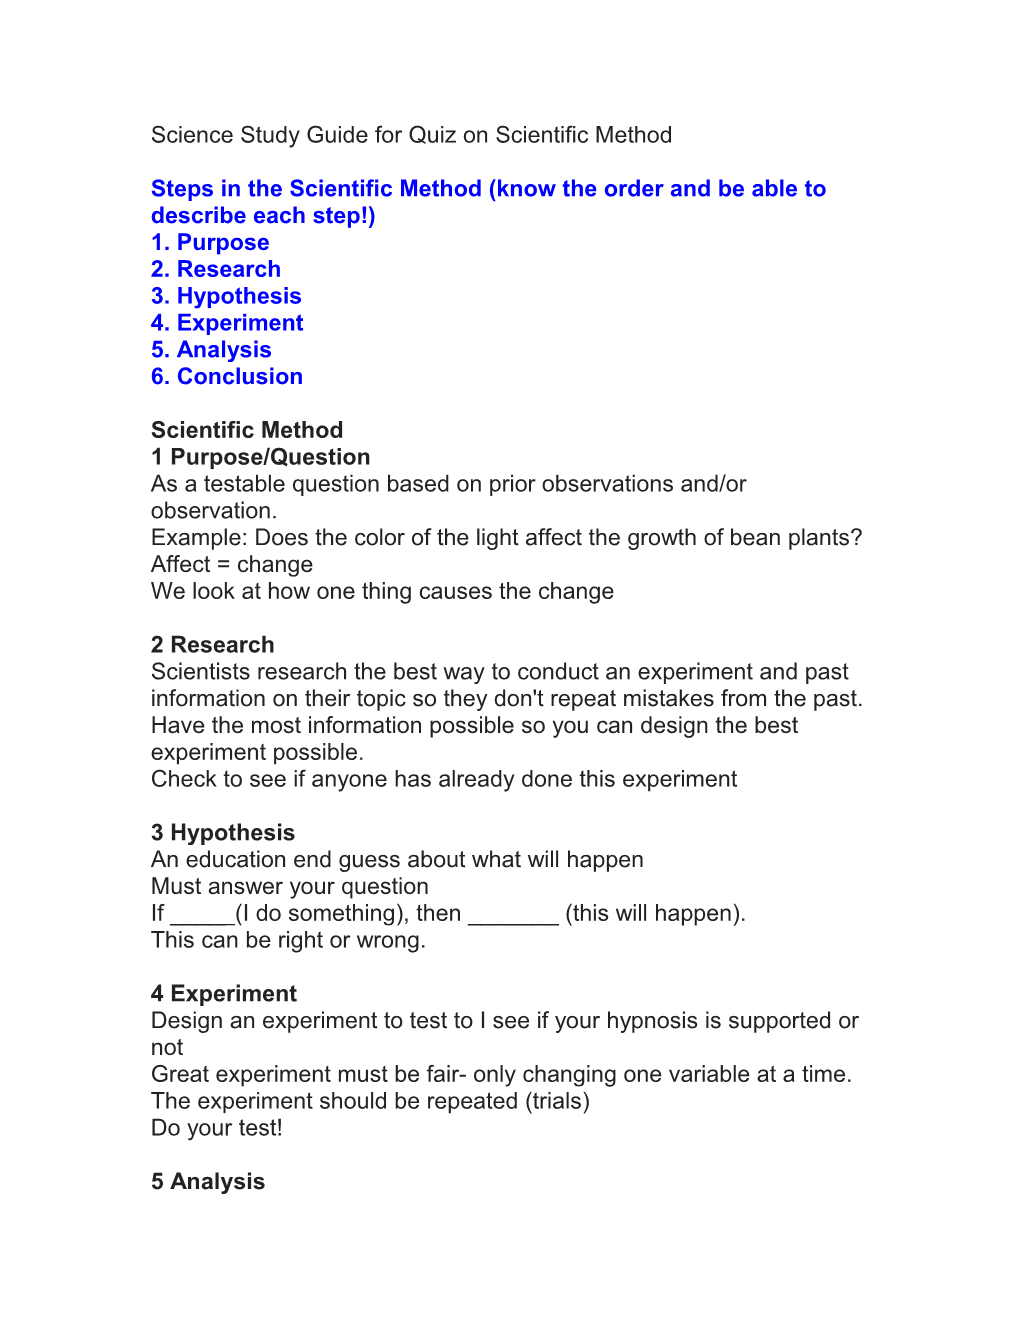 Science Study Guide for Test on Scientific Method